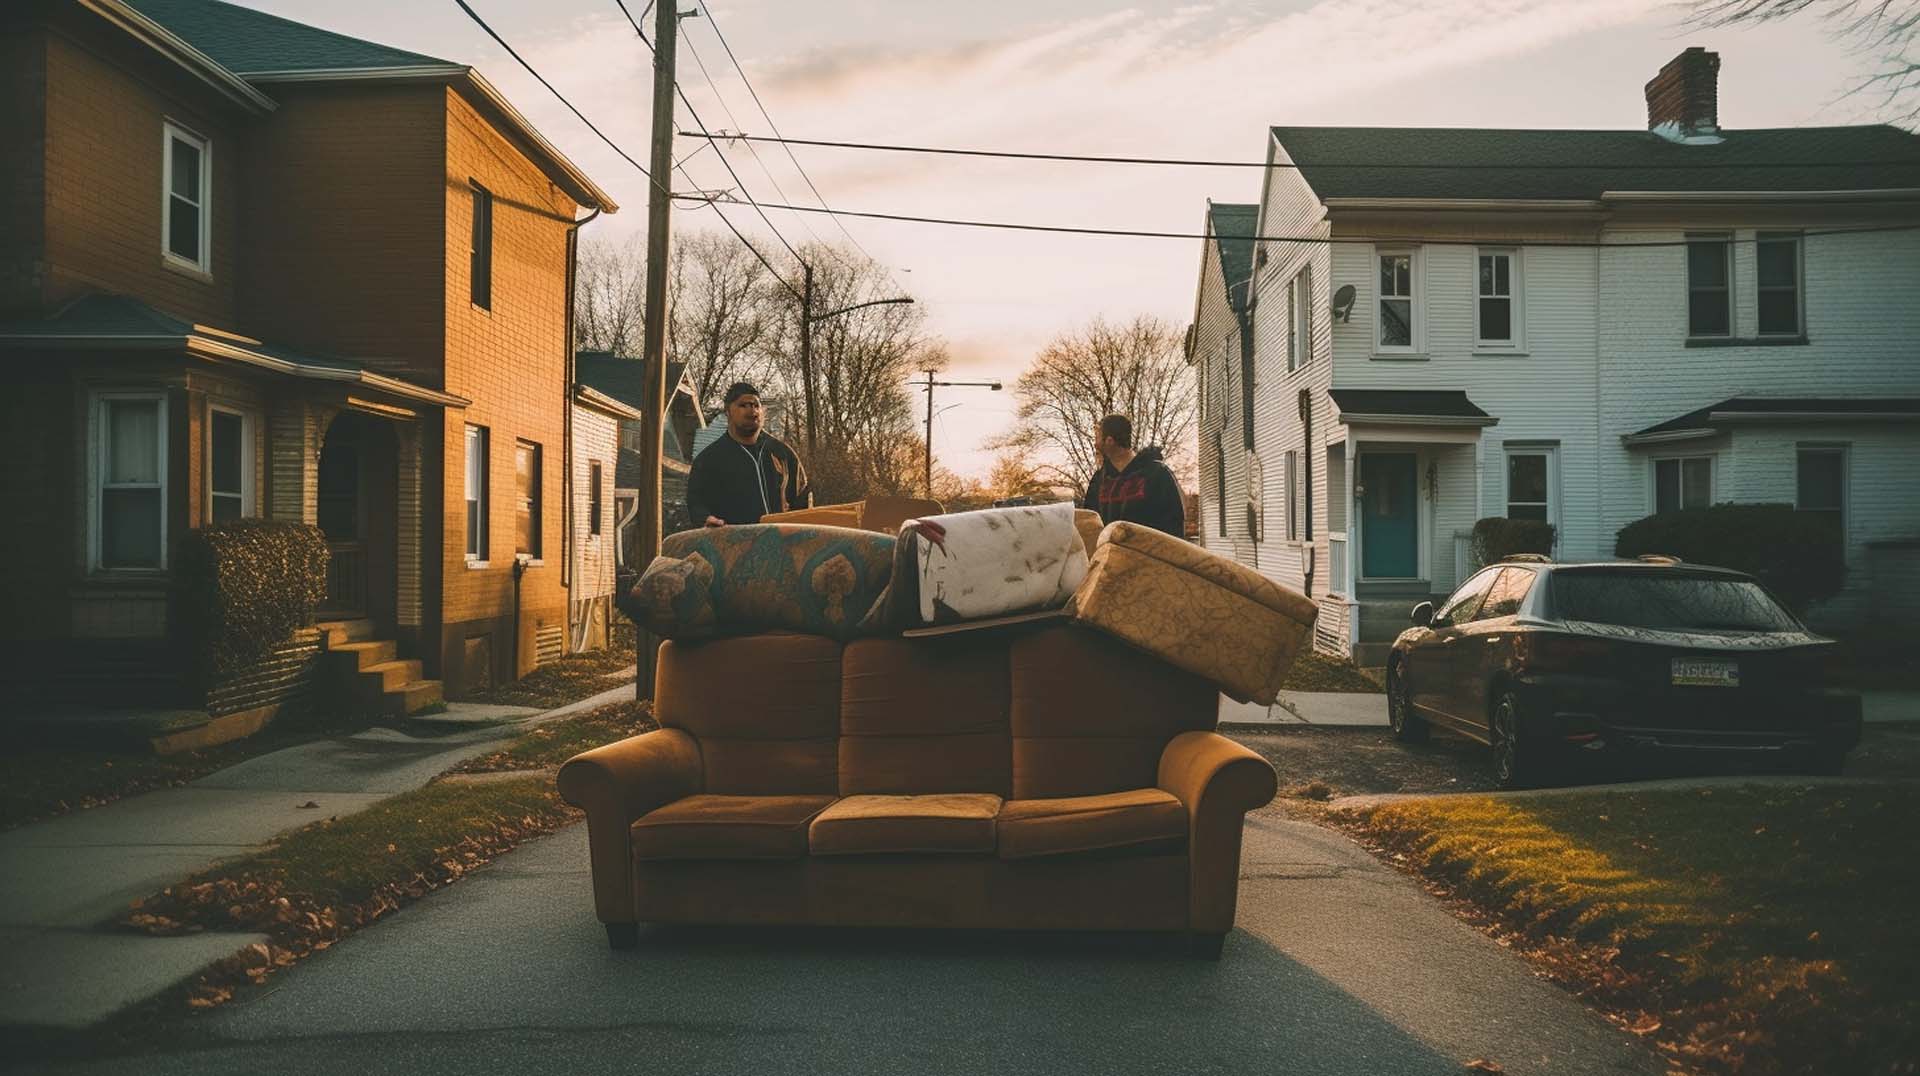 Residential Junk Removal Services in Québec